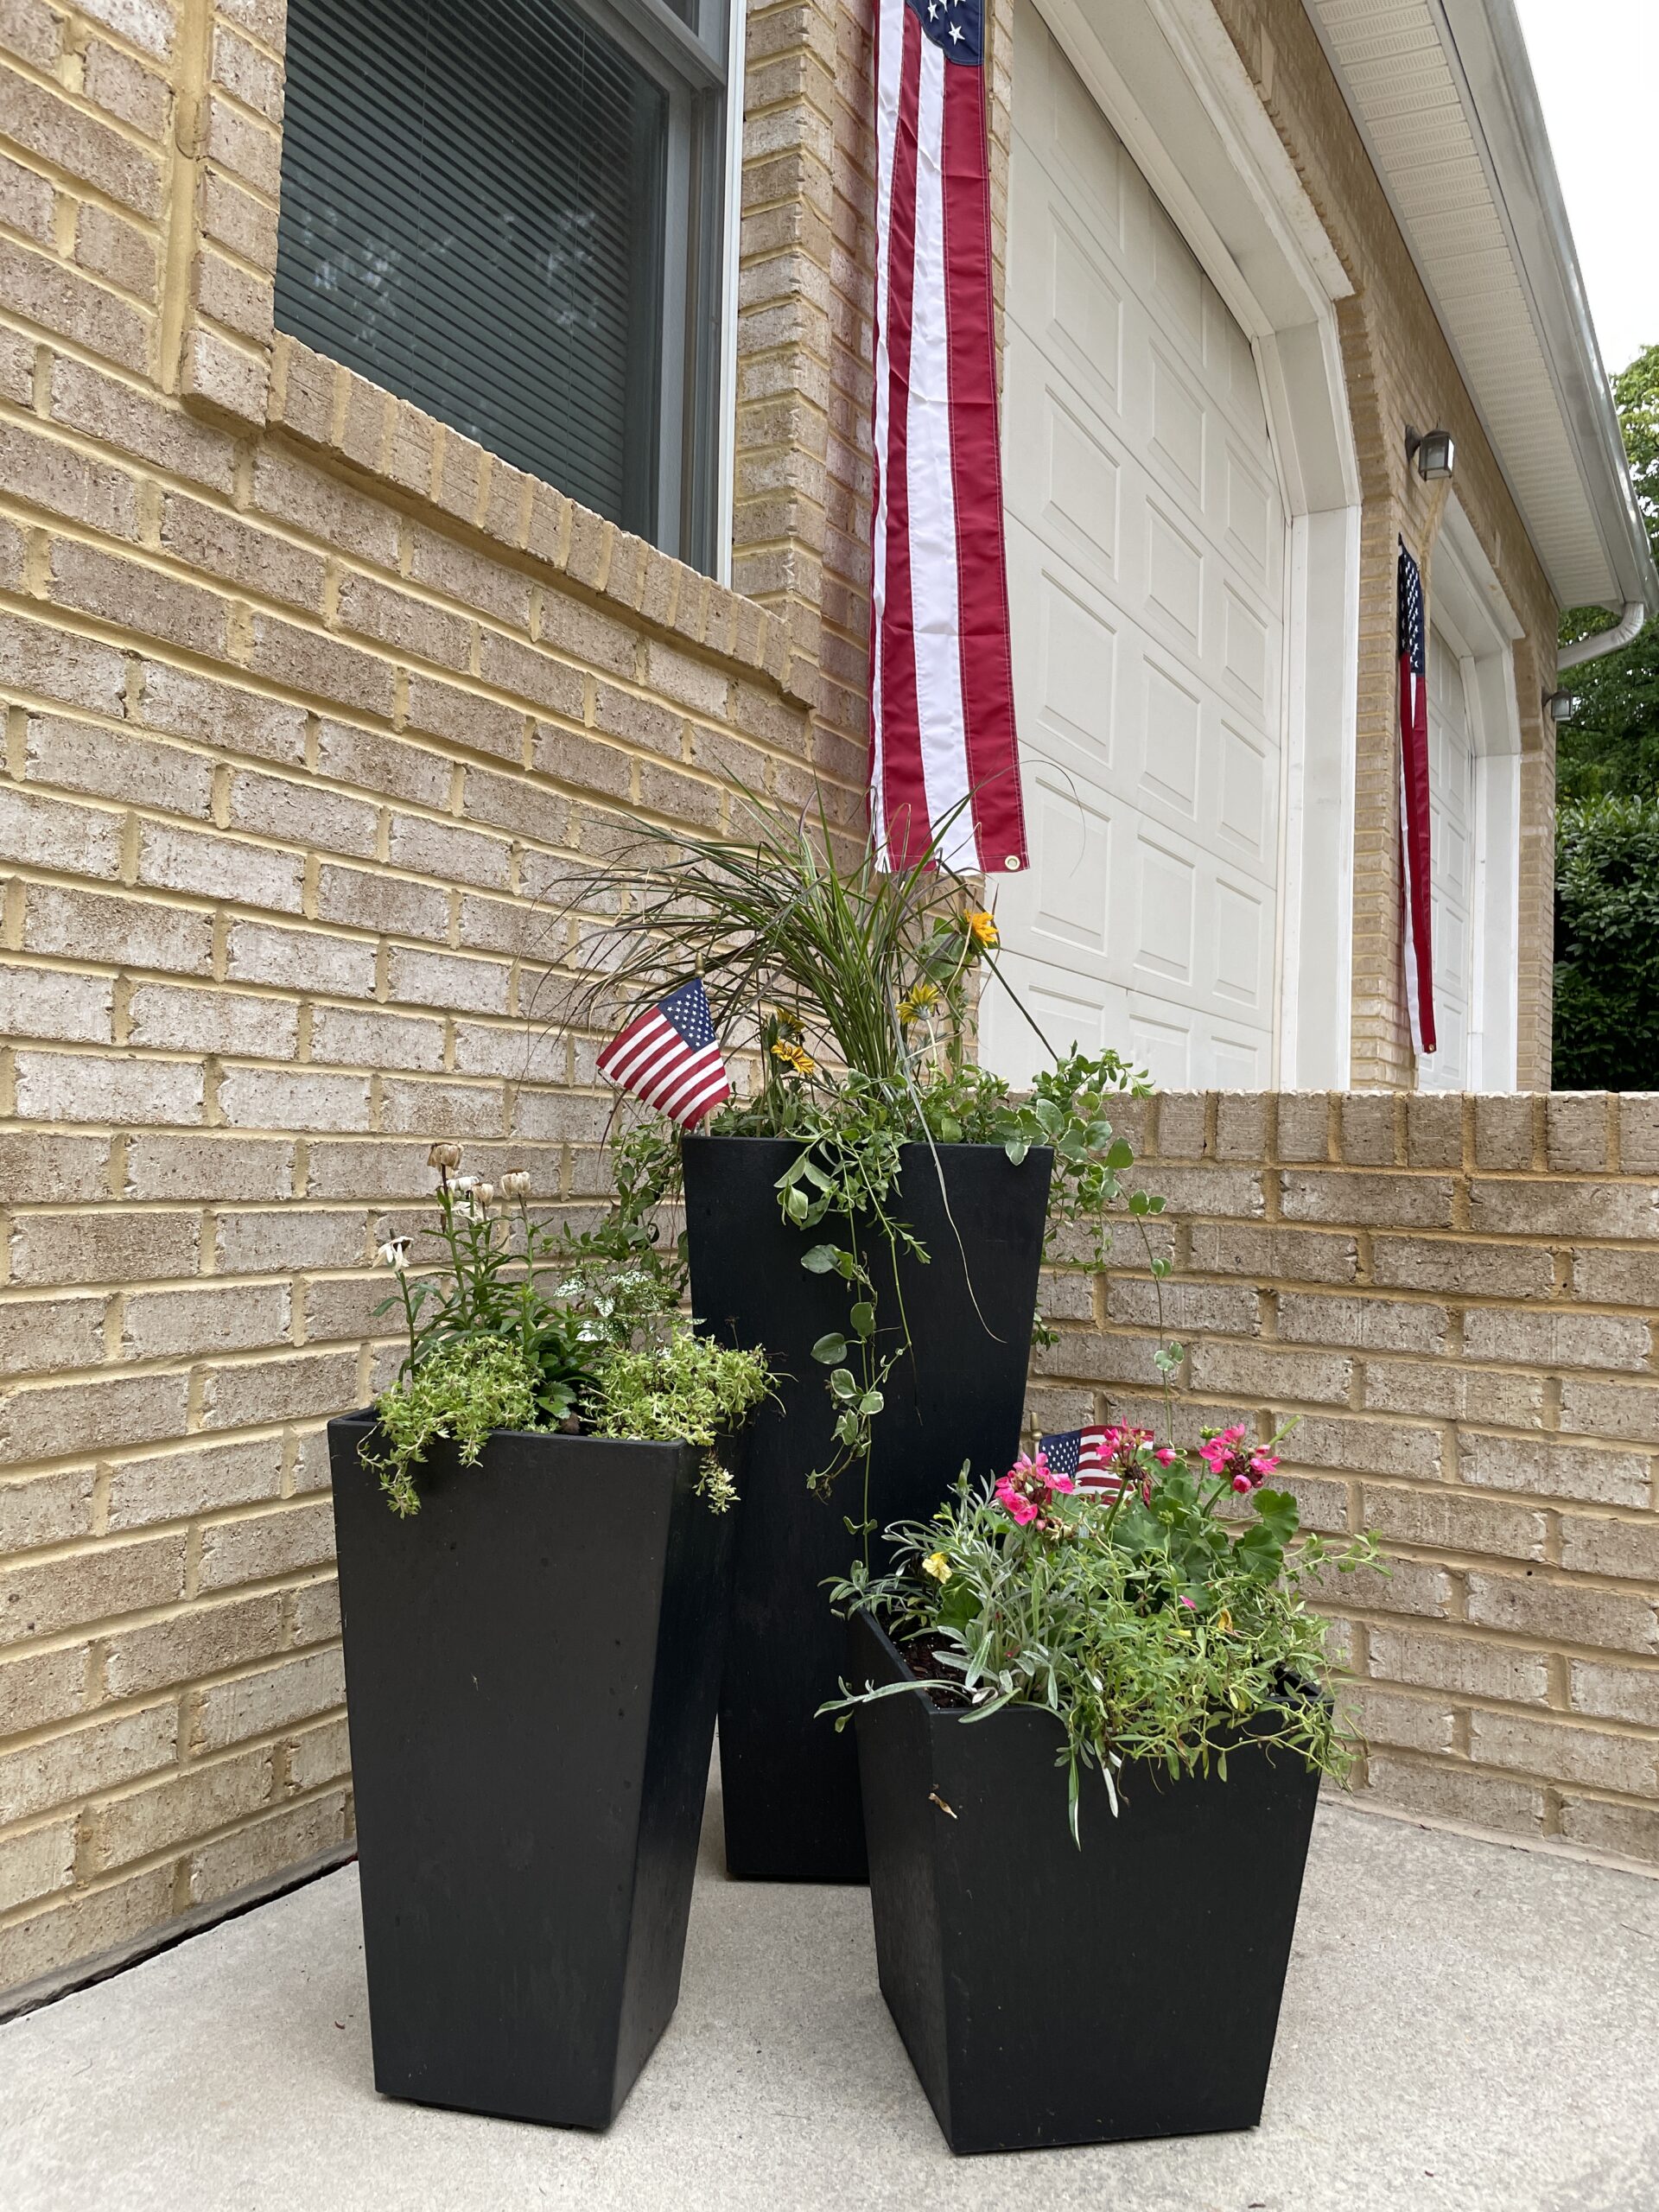 Large Planter Ideas  Buyers Guide To Large Home And Commercial